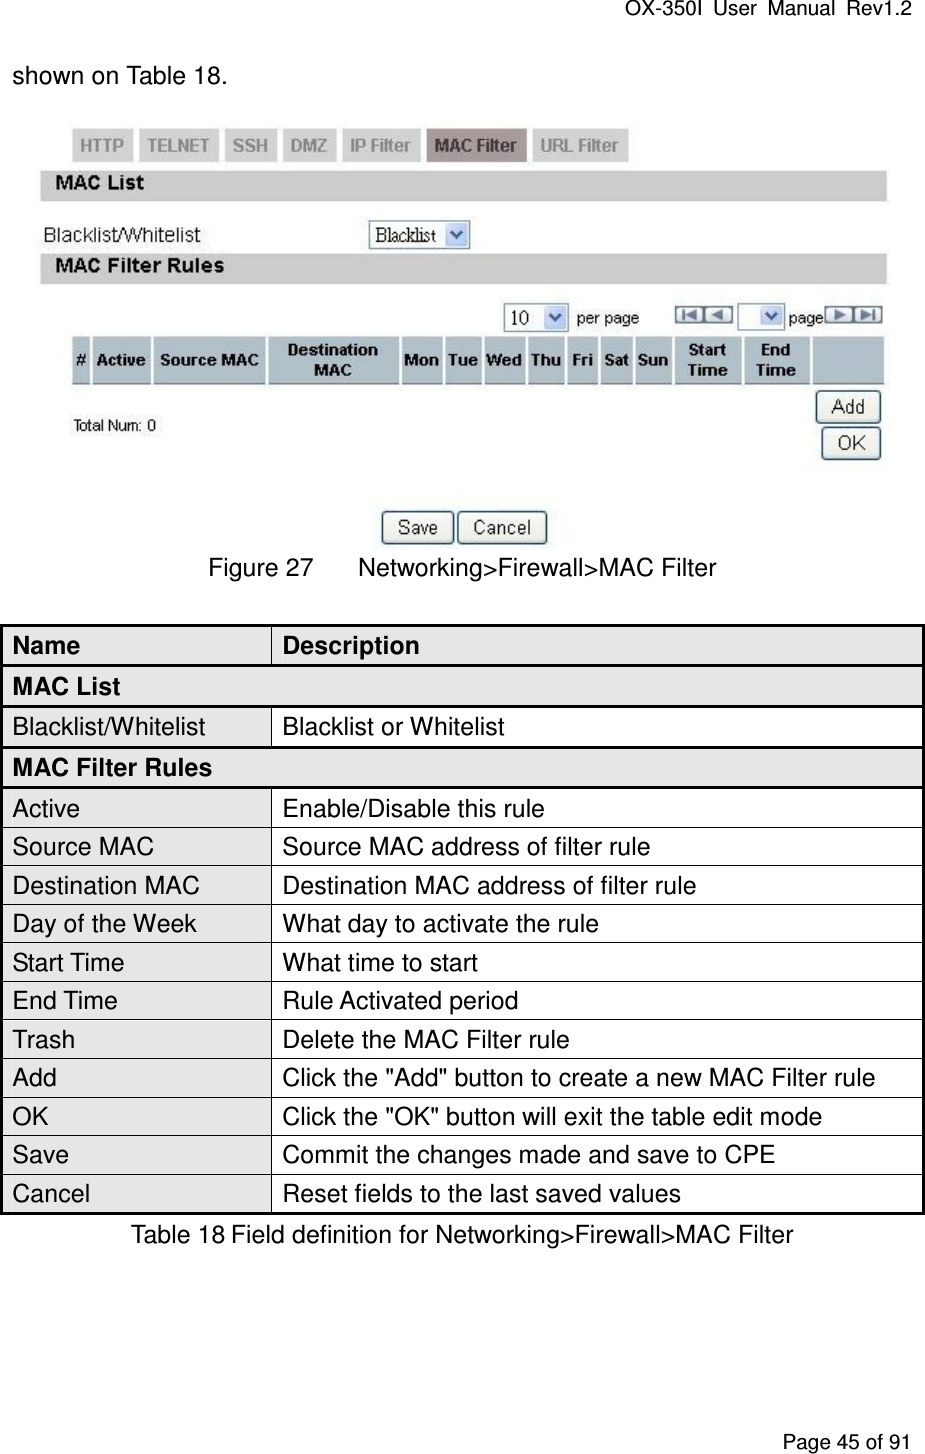 OX-350I  User  Manual  Rev1.2 Page 45 of 91 shown on Table 18.  Figure 27  Networking&gt;Firewall&gt;MAC Filter Name  Description MAC List Blacklist/Whitelist  Blacklist or Whitelist MAC Filter Rules Active  Enable/Disable this rule Source MAC  Source MAC address of filter rule Destination MAC  Destination MAC address of filter rule Day of the Week  What day to activate the rule Start Time  What time to start End Time  Rule Activated period Trash  Delete the MAC Filter rule Add  Click the &quot;Add&quot; button to create a new MAC Filter rule OK  Click the &quot;OK&quot; button will exit the table edit mode Save  Commit the changes made and save to CPE Cancel  Reset fields to the last saved values Table 18 Field definition for Networking&gt;Firewall&gt;MAC Filter 